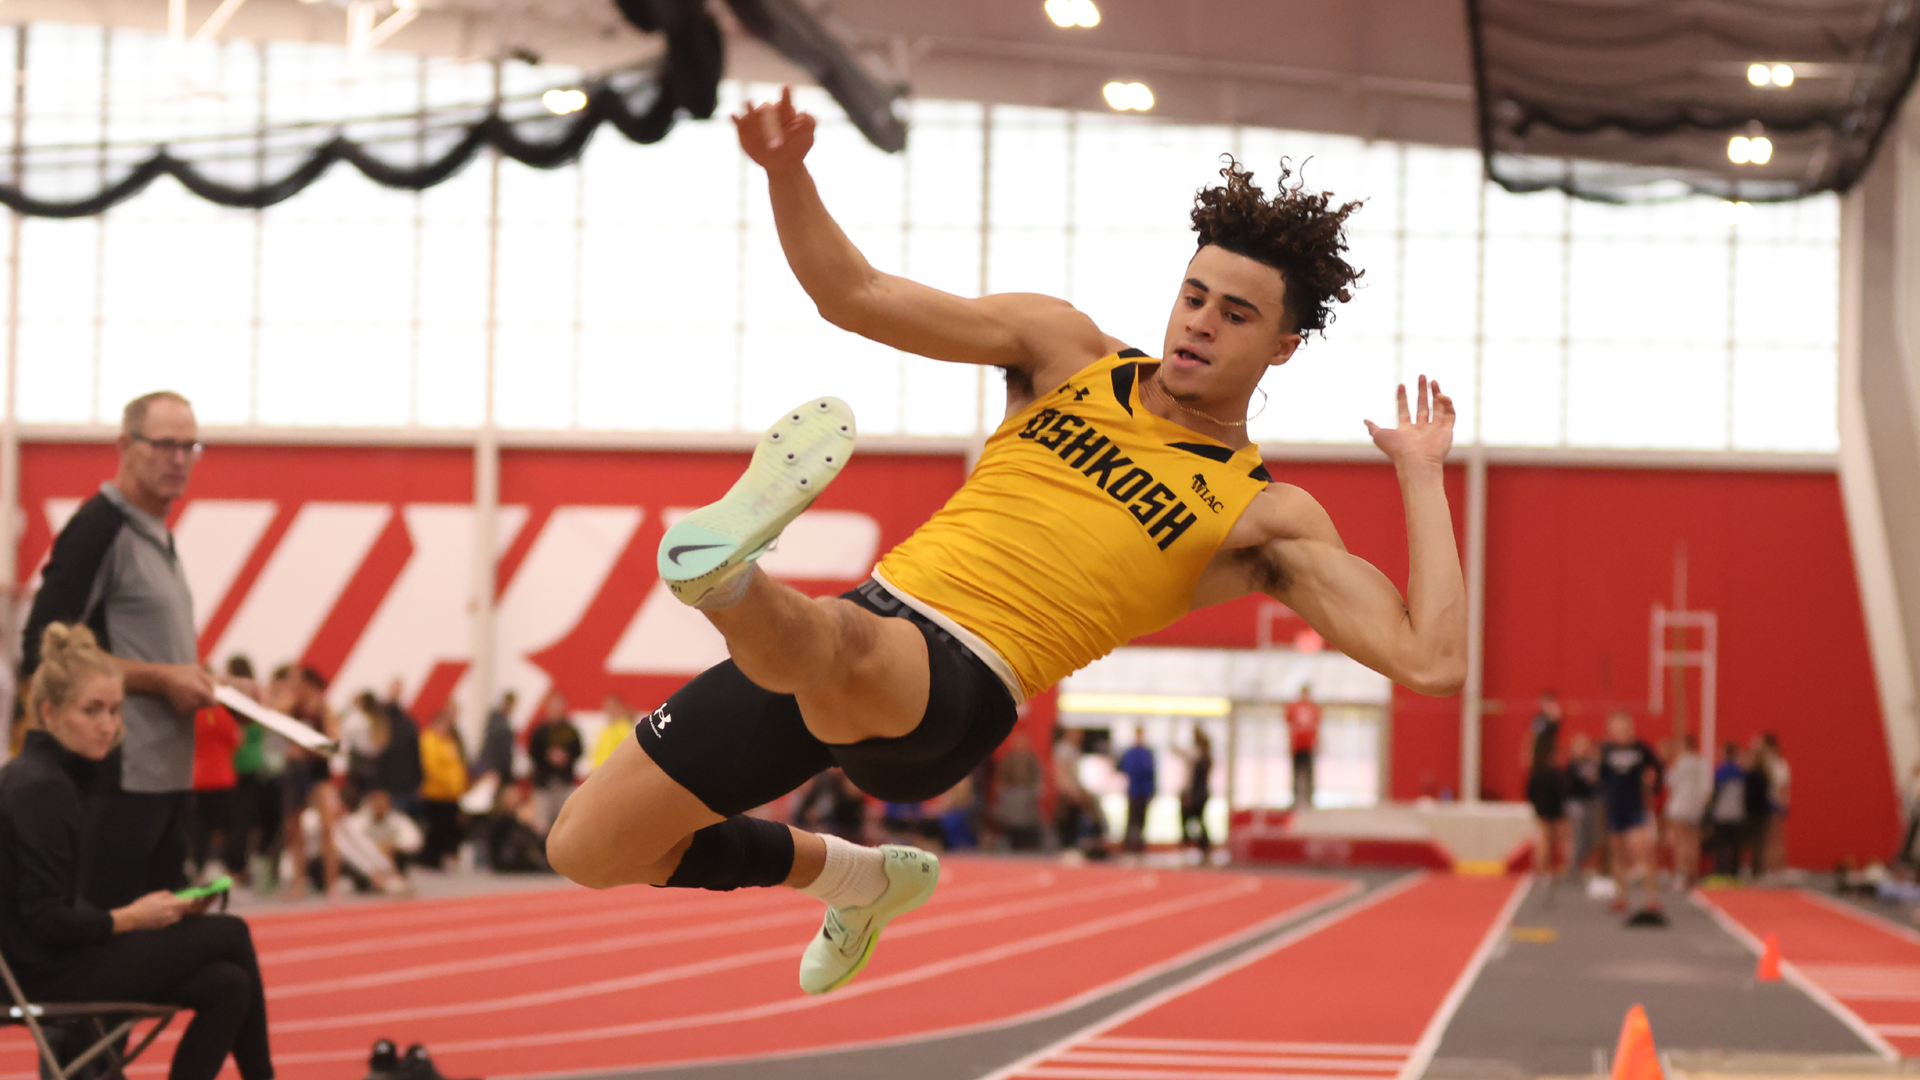 Joshua Rivers broke the program long jump record with a 7.55-meter mark in the Ripon College Winter Open on Saturday. Photo Credit: Steve Frommell, UW-Oshkosh Sports Information